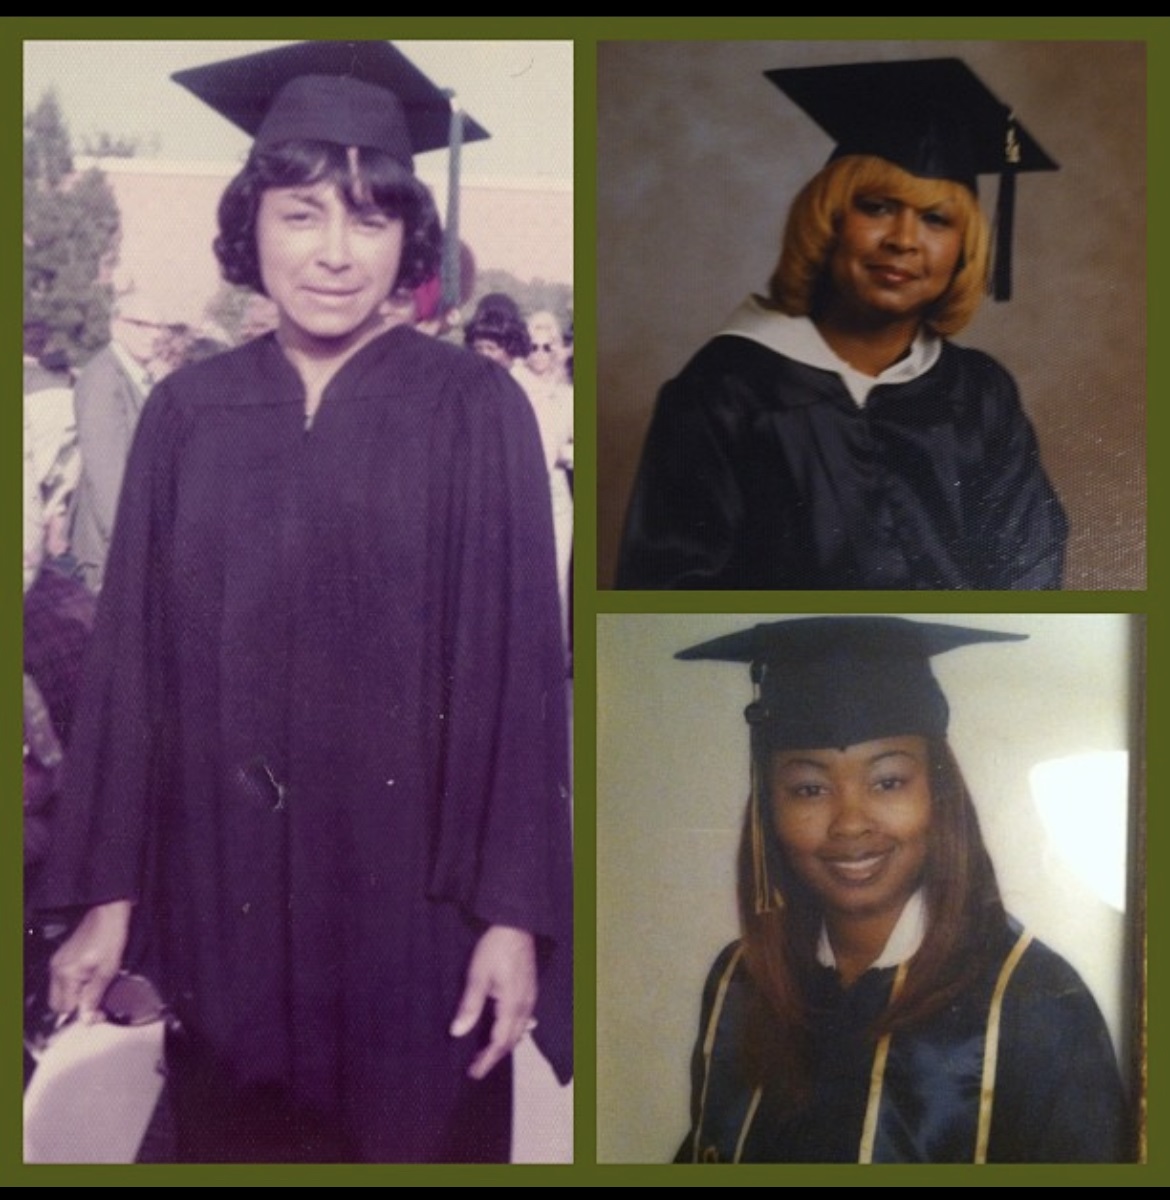 Collage of Mack family in graduation garb